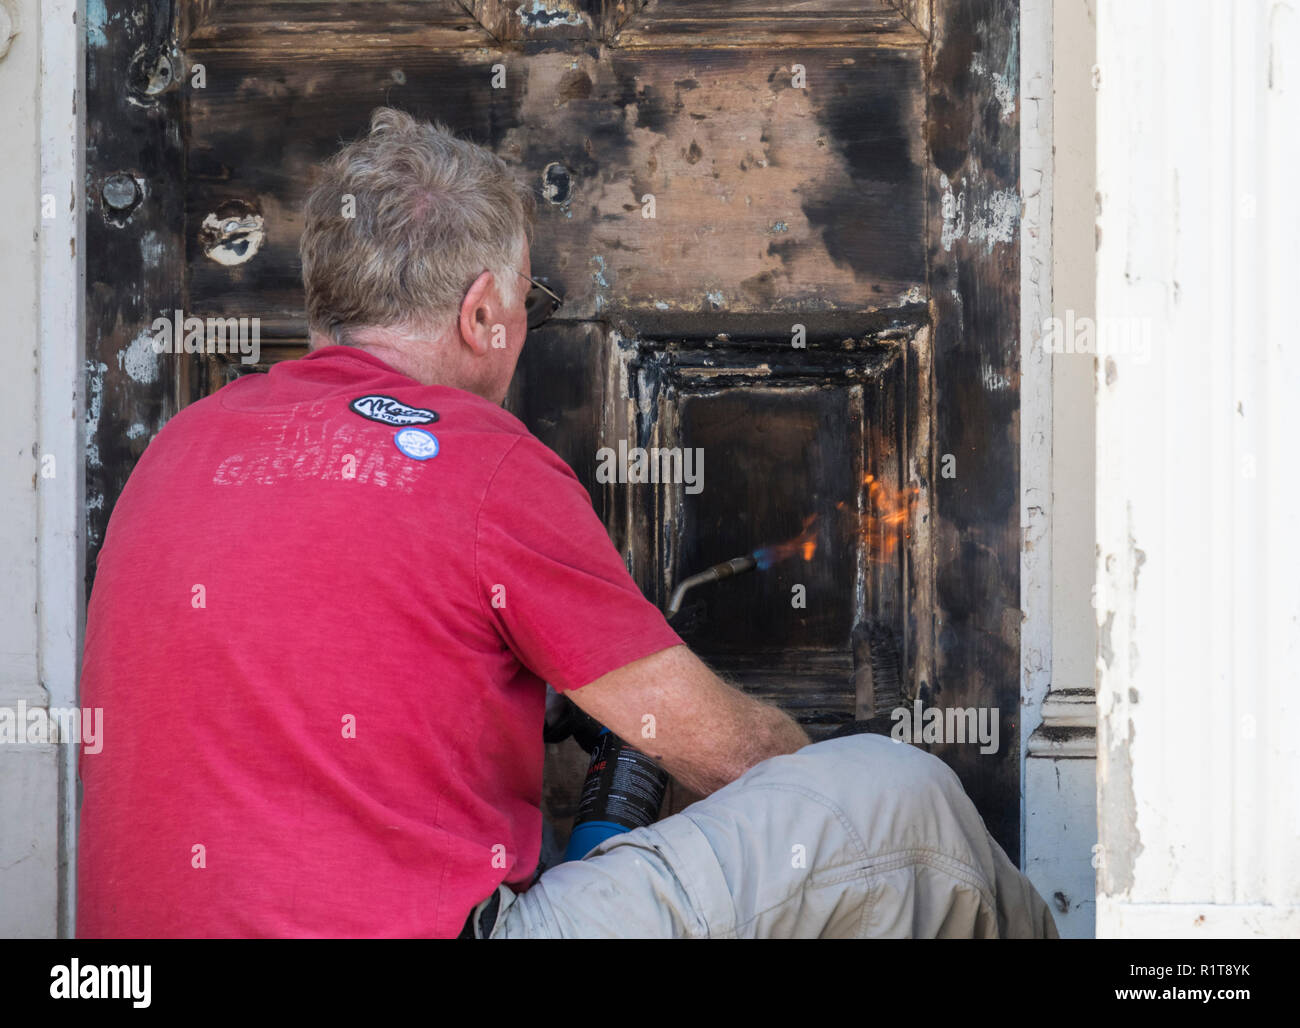 Man using hot gas powered blow torch (blowtorch) to strip paint from a front door. House renovations, painter & decorator. Stock Photo